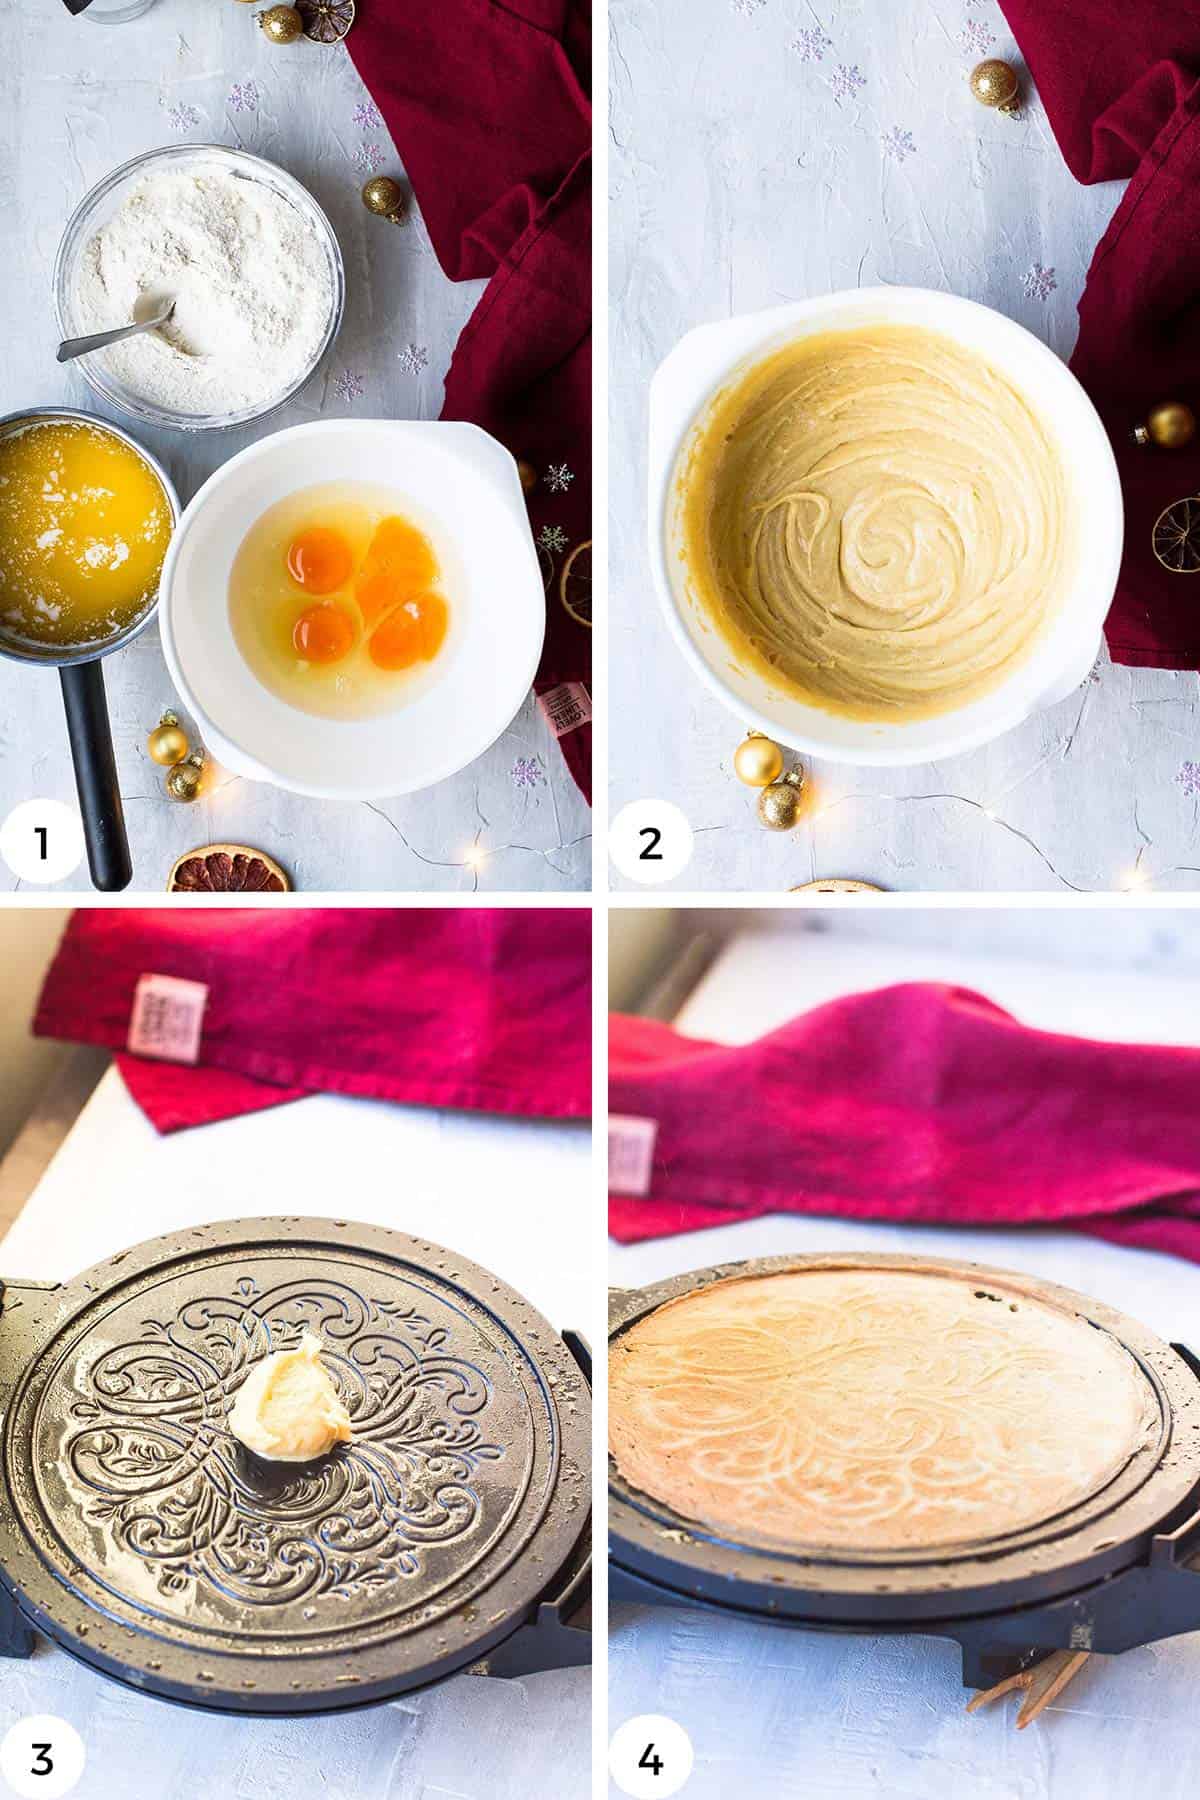 Steps to make the batter and cook on the krumkake iron.